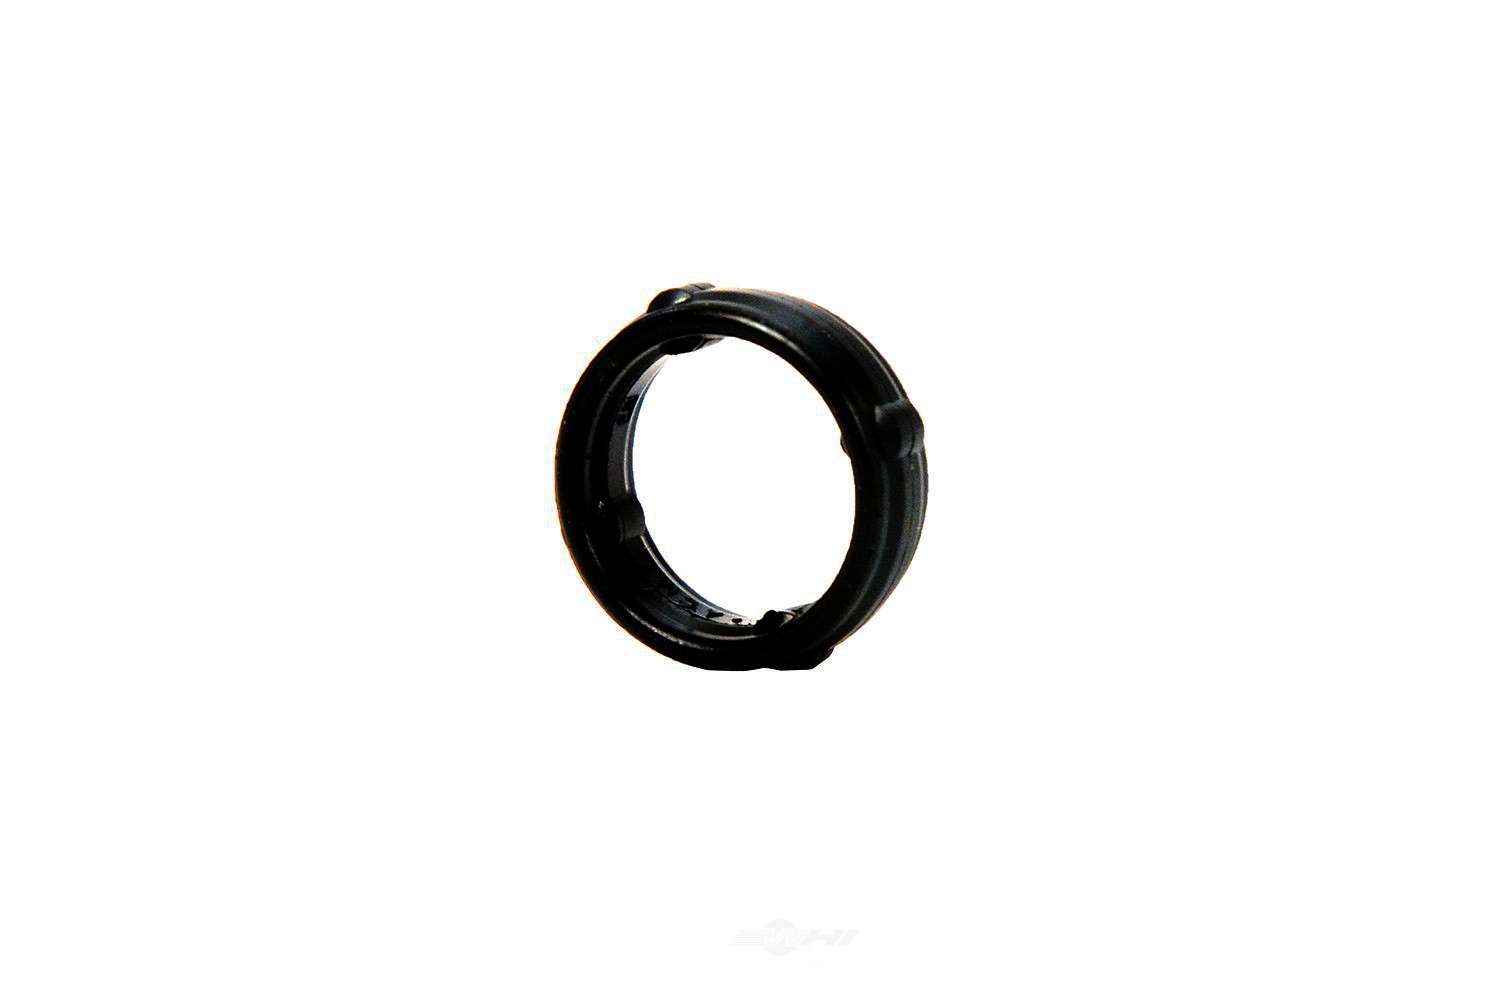 GM GENUINE PARTS CANADA - Engine Oil Seal Ring - GMC 12610160